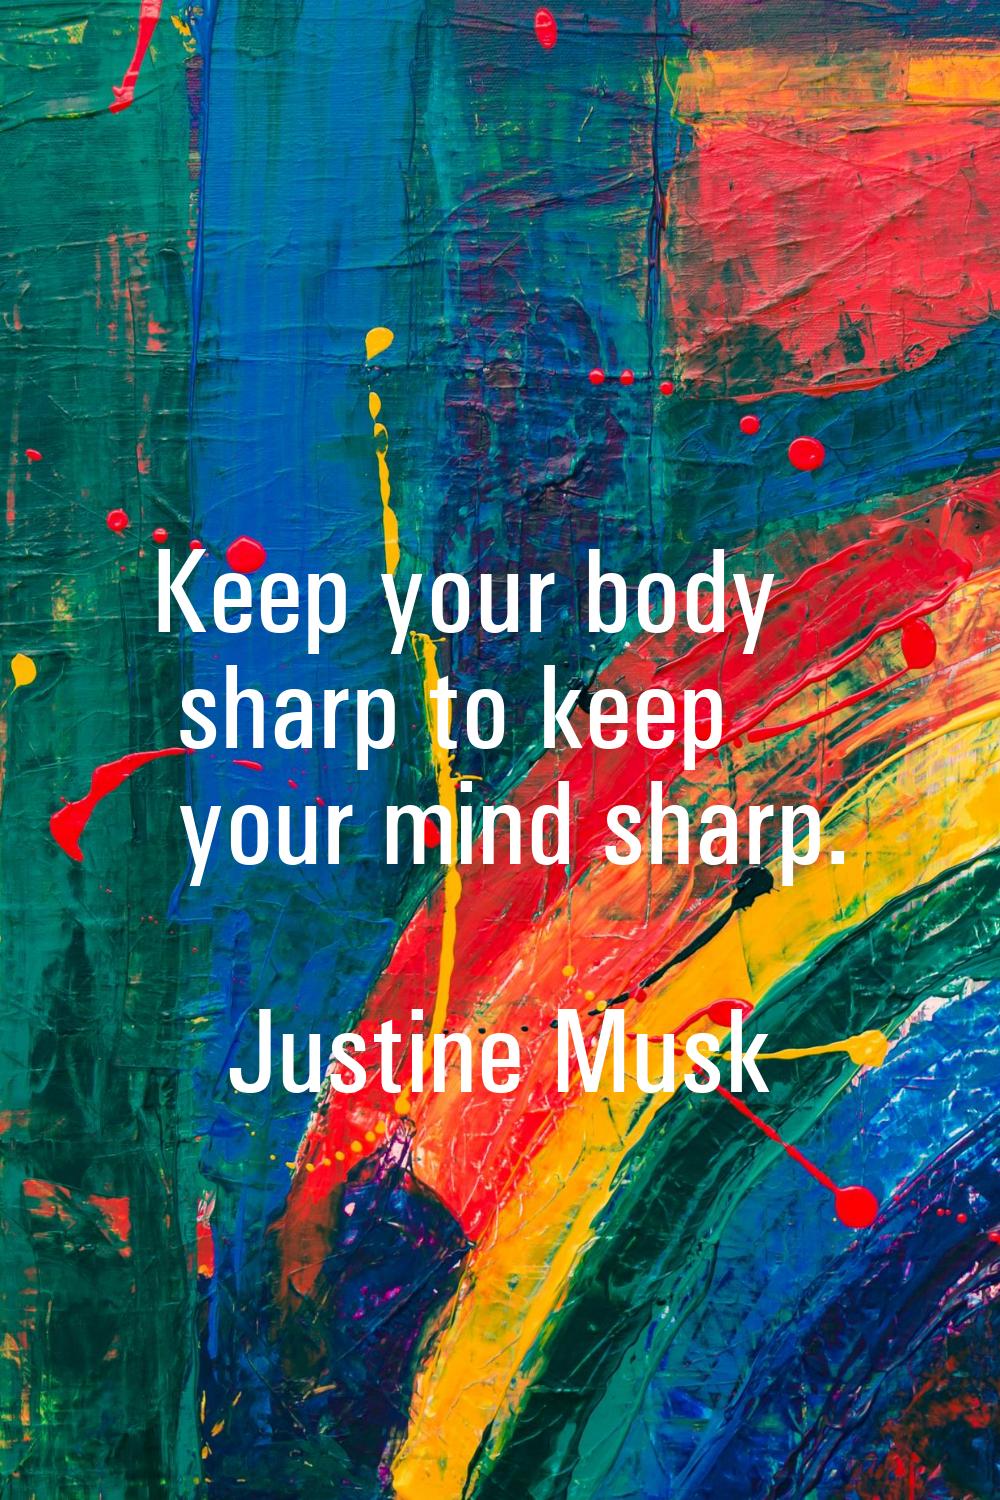 Keep your body sharp to keep your mind sharp.